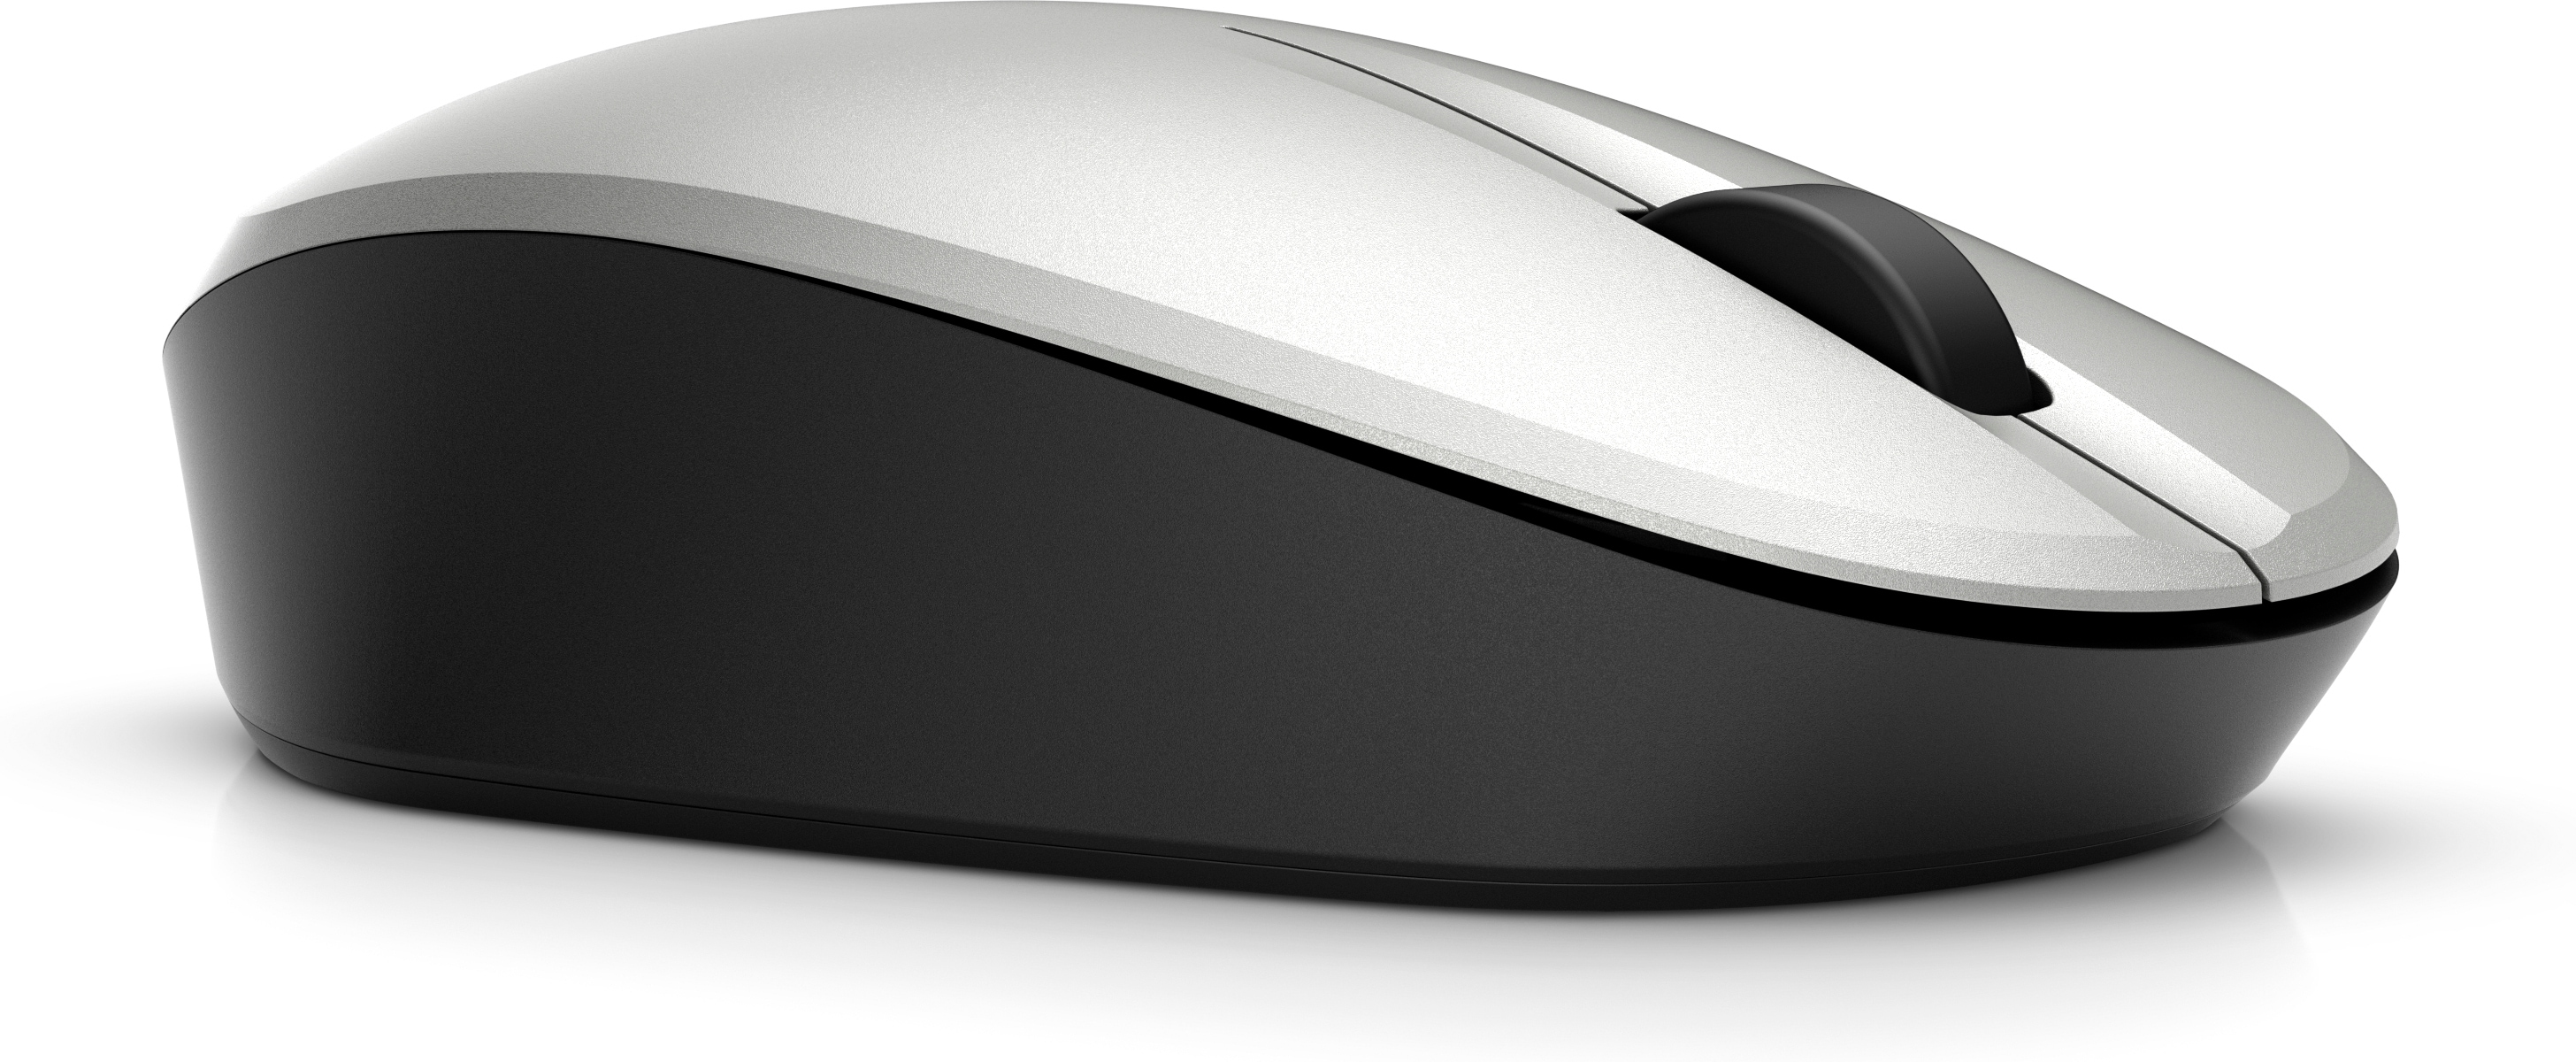 Image of HP Dual Mode Mouse